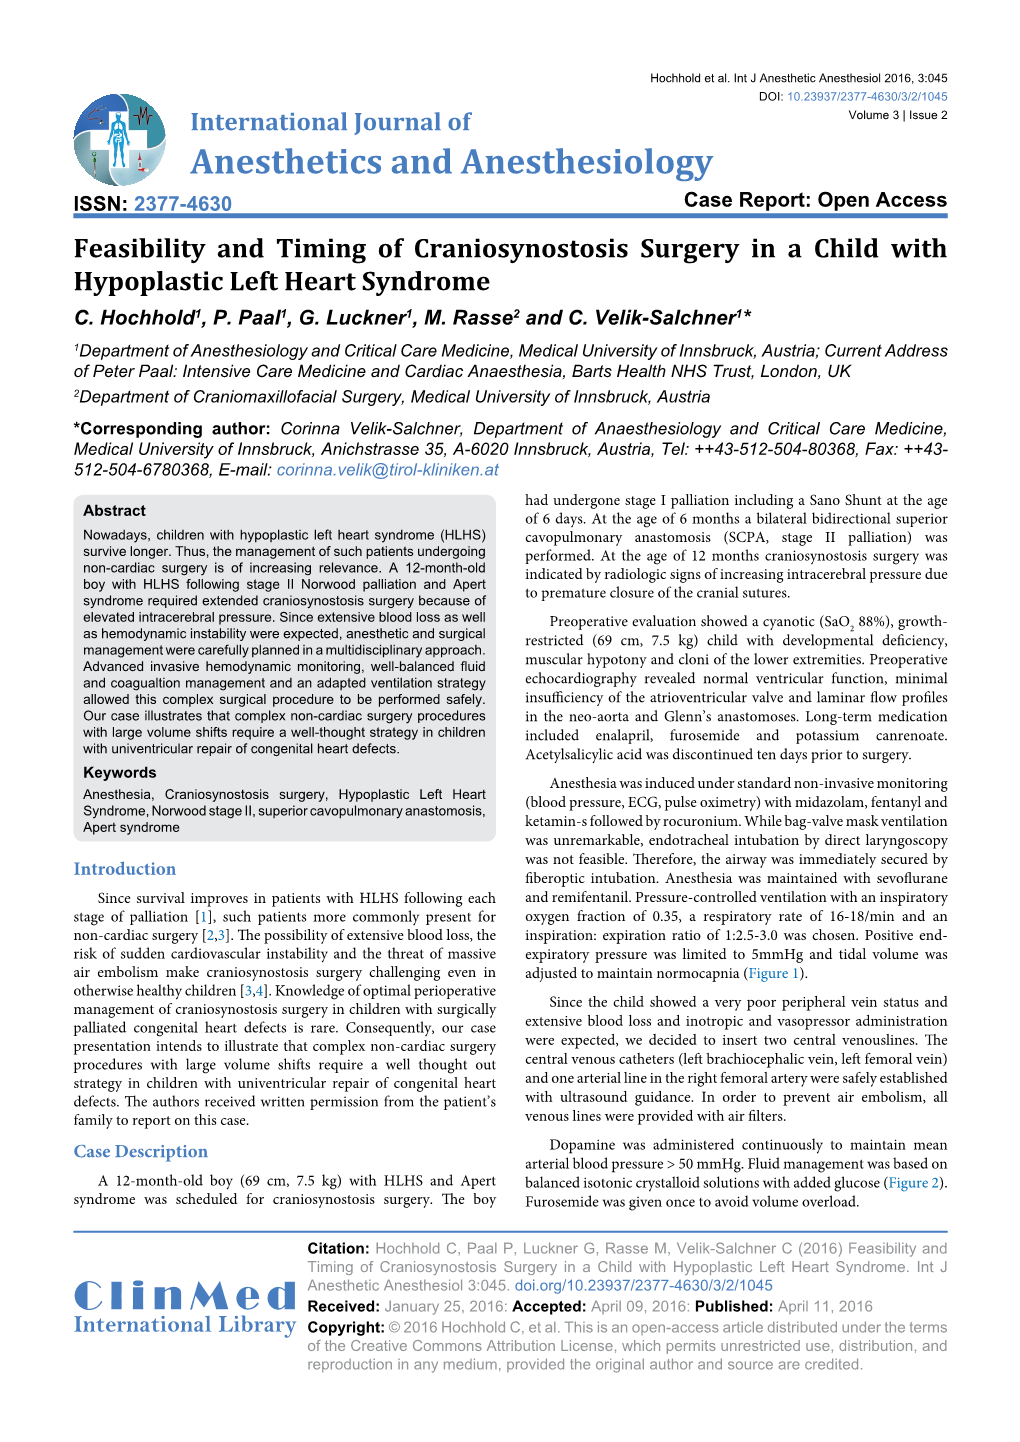 Feasibility and Timing of Craniosynostosis Surgery in a Child with Hypoplastic Left Heart Syndrome C